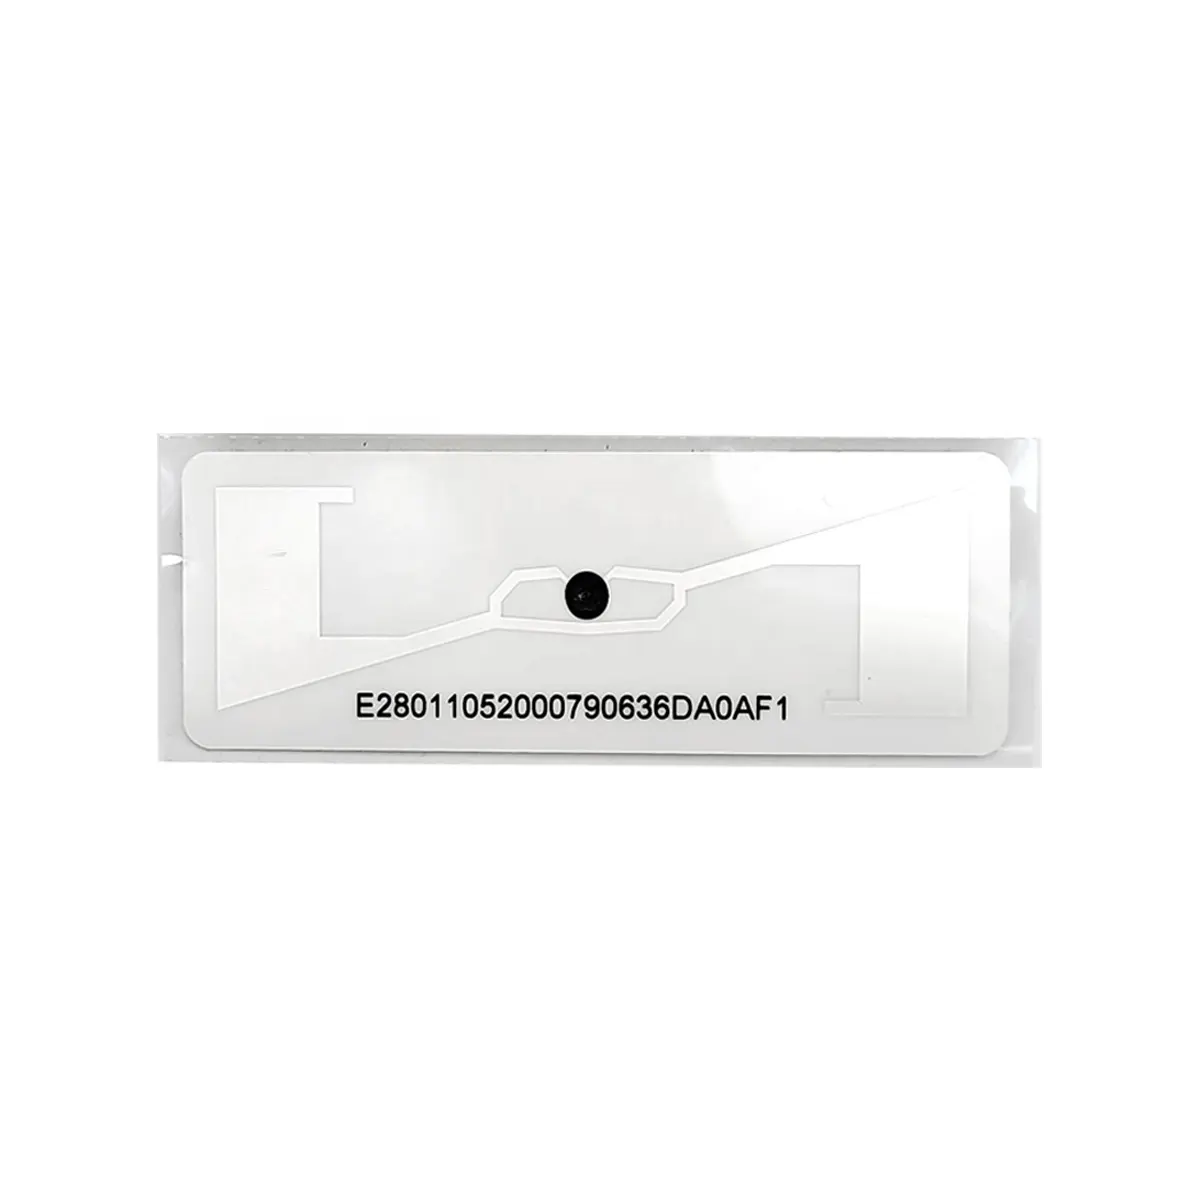 CPH-D1104 high quality UHF vehicle windshield tag tamper proof label 860-960Mhz parking access management